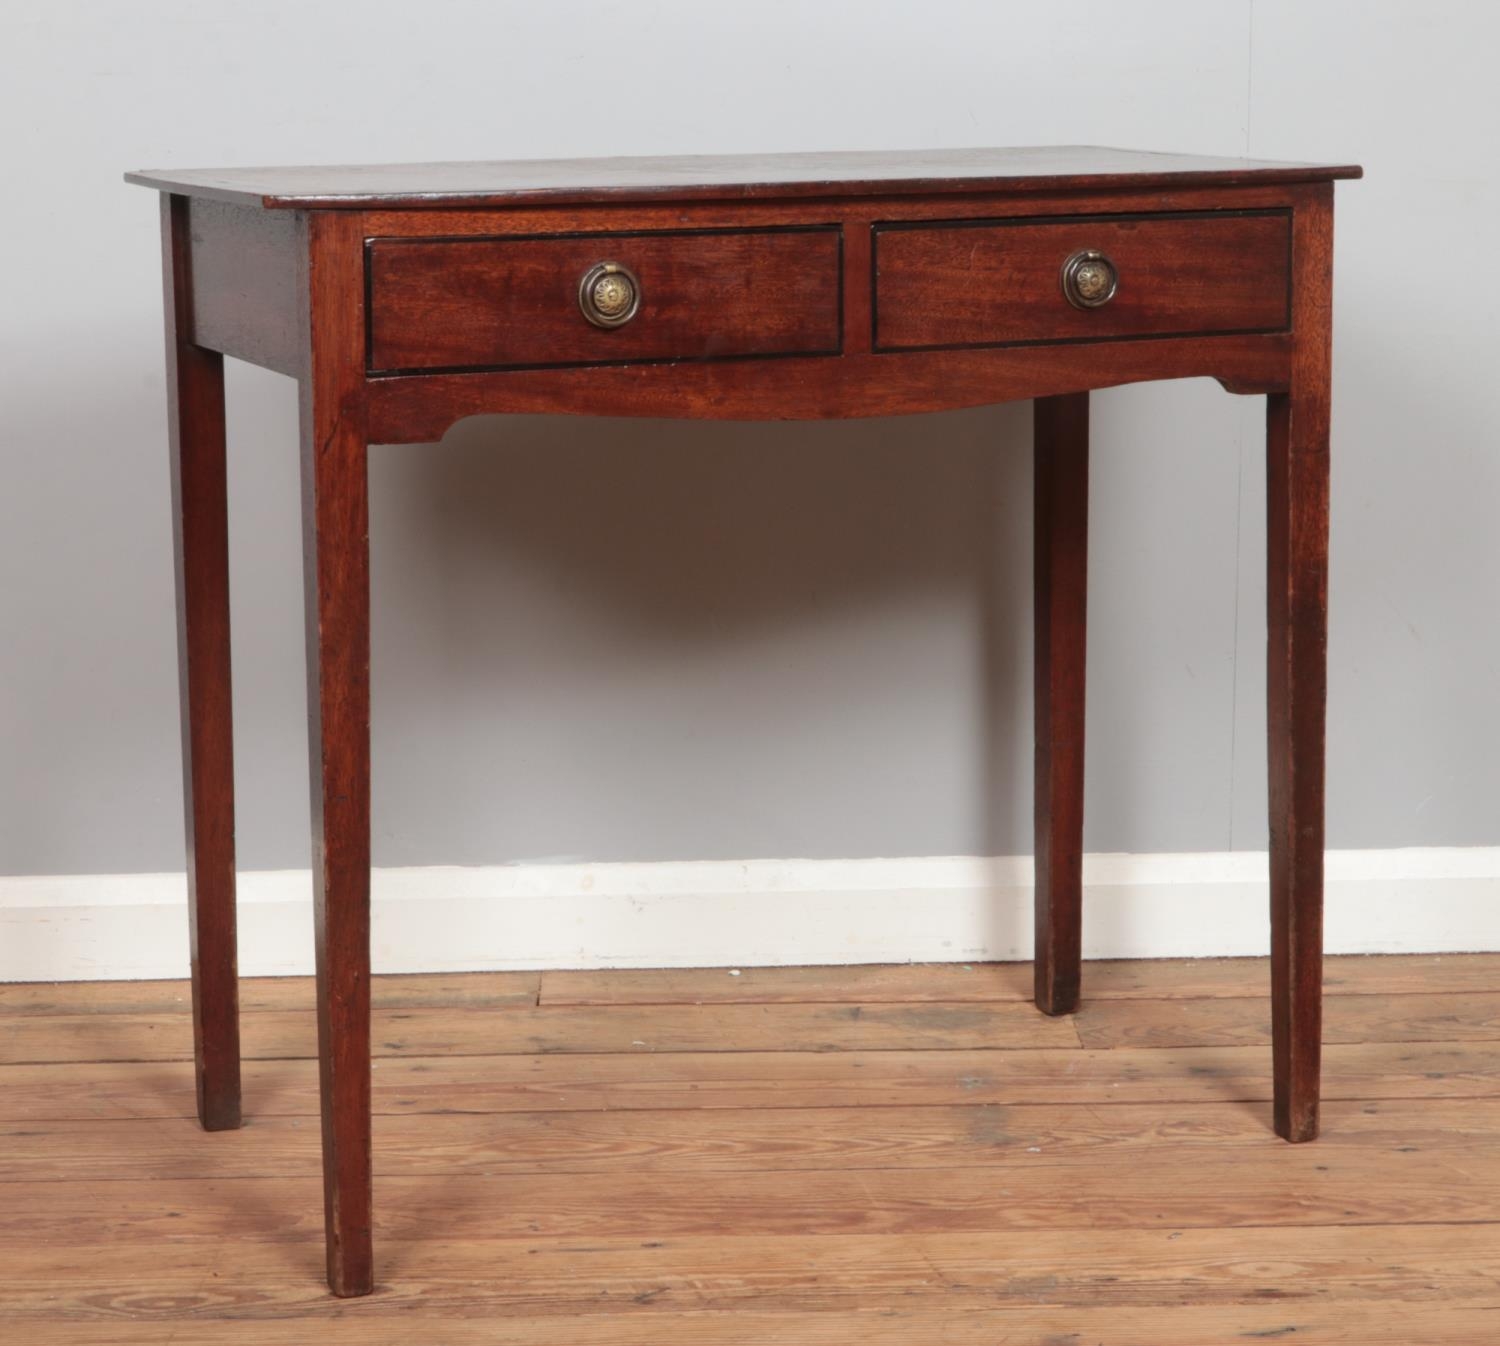 A Georgian Mahogany side table having two short drawers with brass ring pull handles. Hx75cm